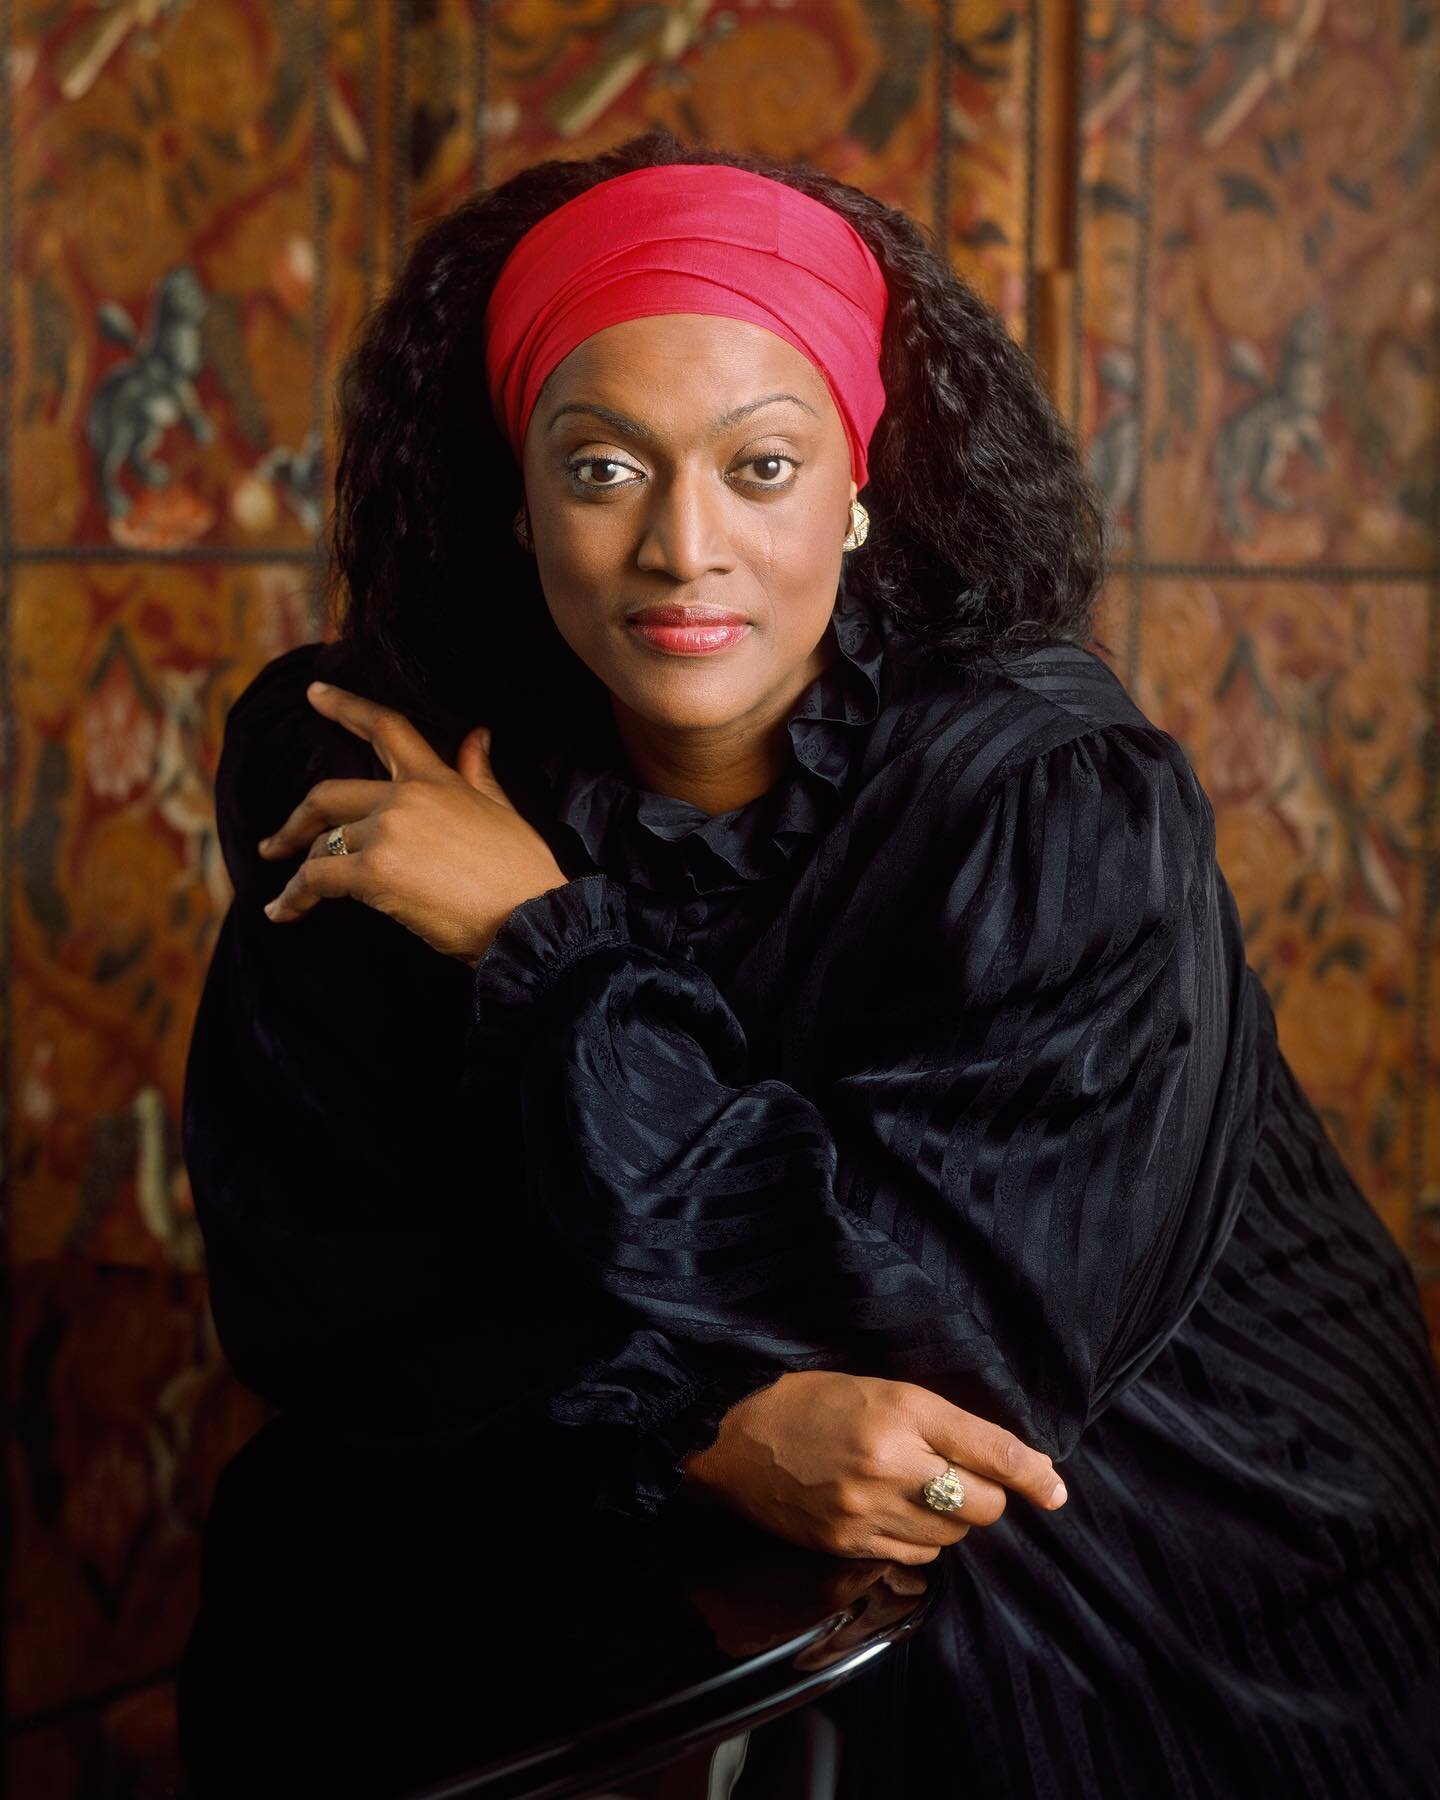 Today, we remember trailblazing soprano Jessye Norman on what would have been her 77th birthday. With a prolific performance career that spanned the Baroque to the contemporary, Norman captivated audiences with her commanding stage presence and her s